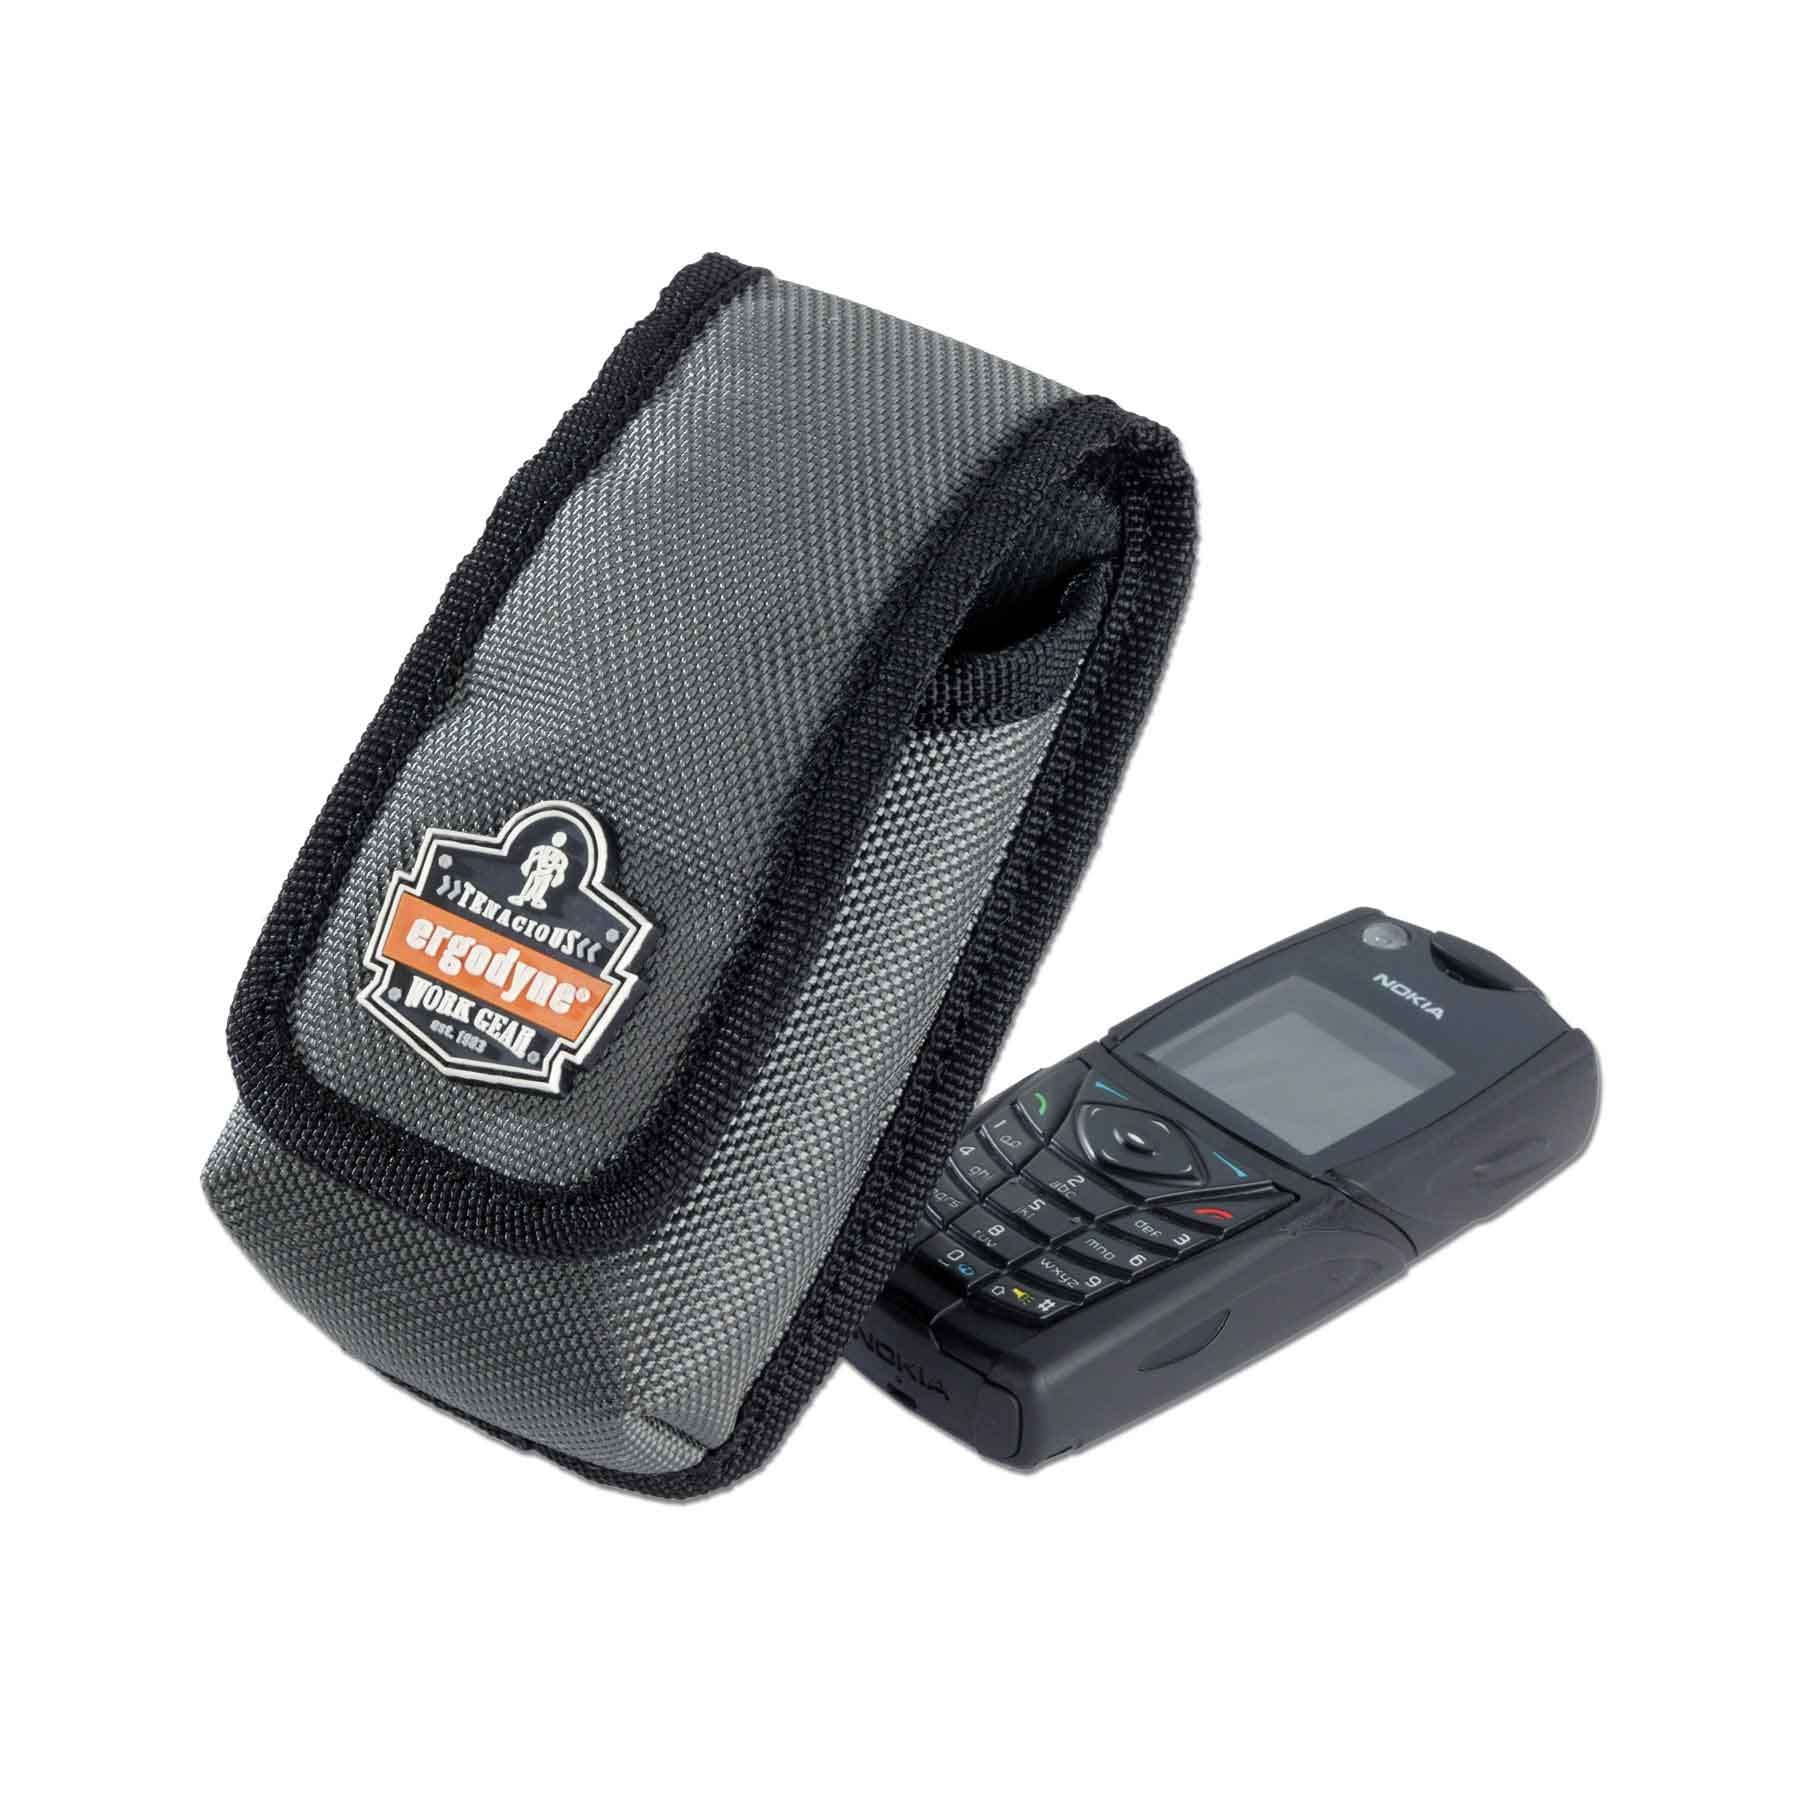 Arsenal 5885 Cell Phone Holder-eSafety Supplies, Inc